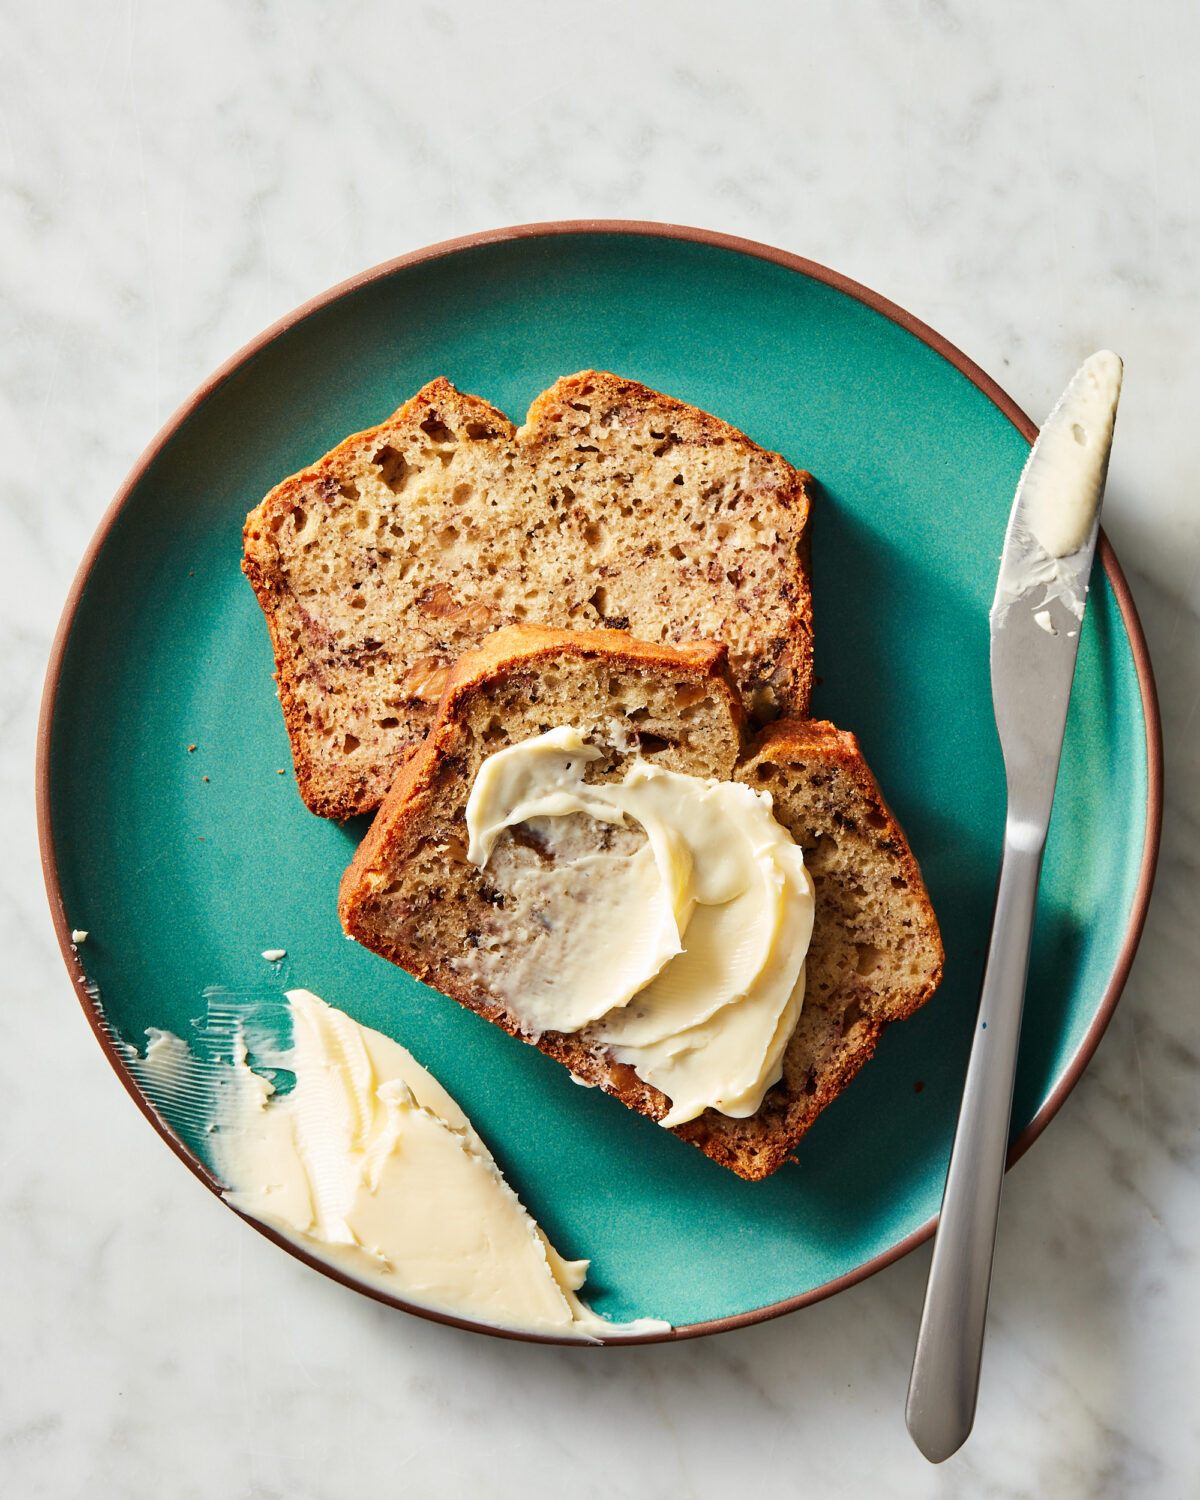 In this walnut banana bread, brown butter flavor adds to the nuttiness of walnuts in the most delicious way. (Christopher Testani/TNS)